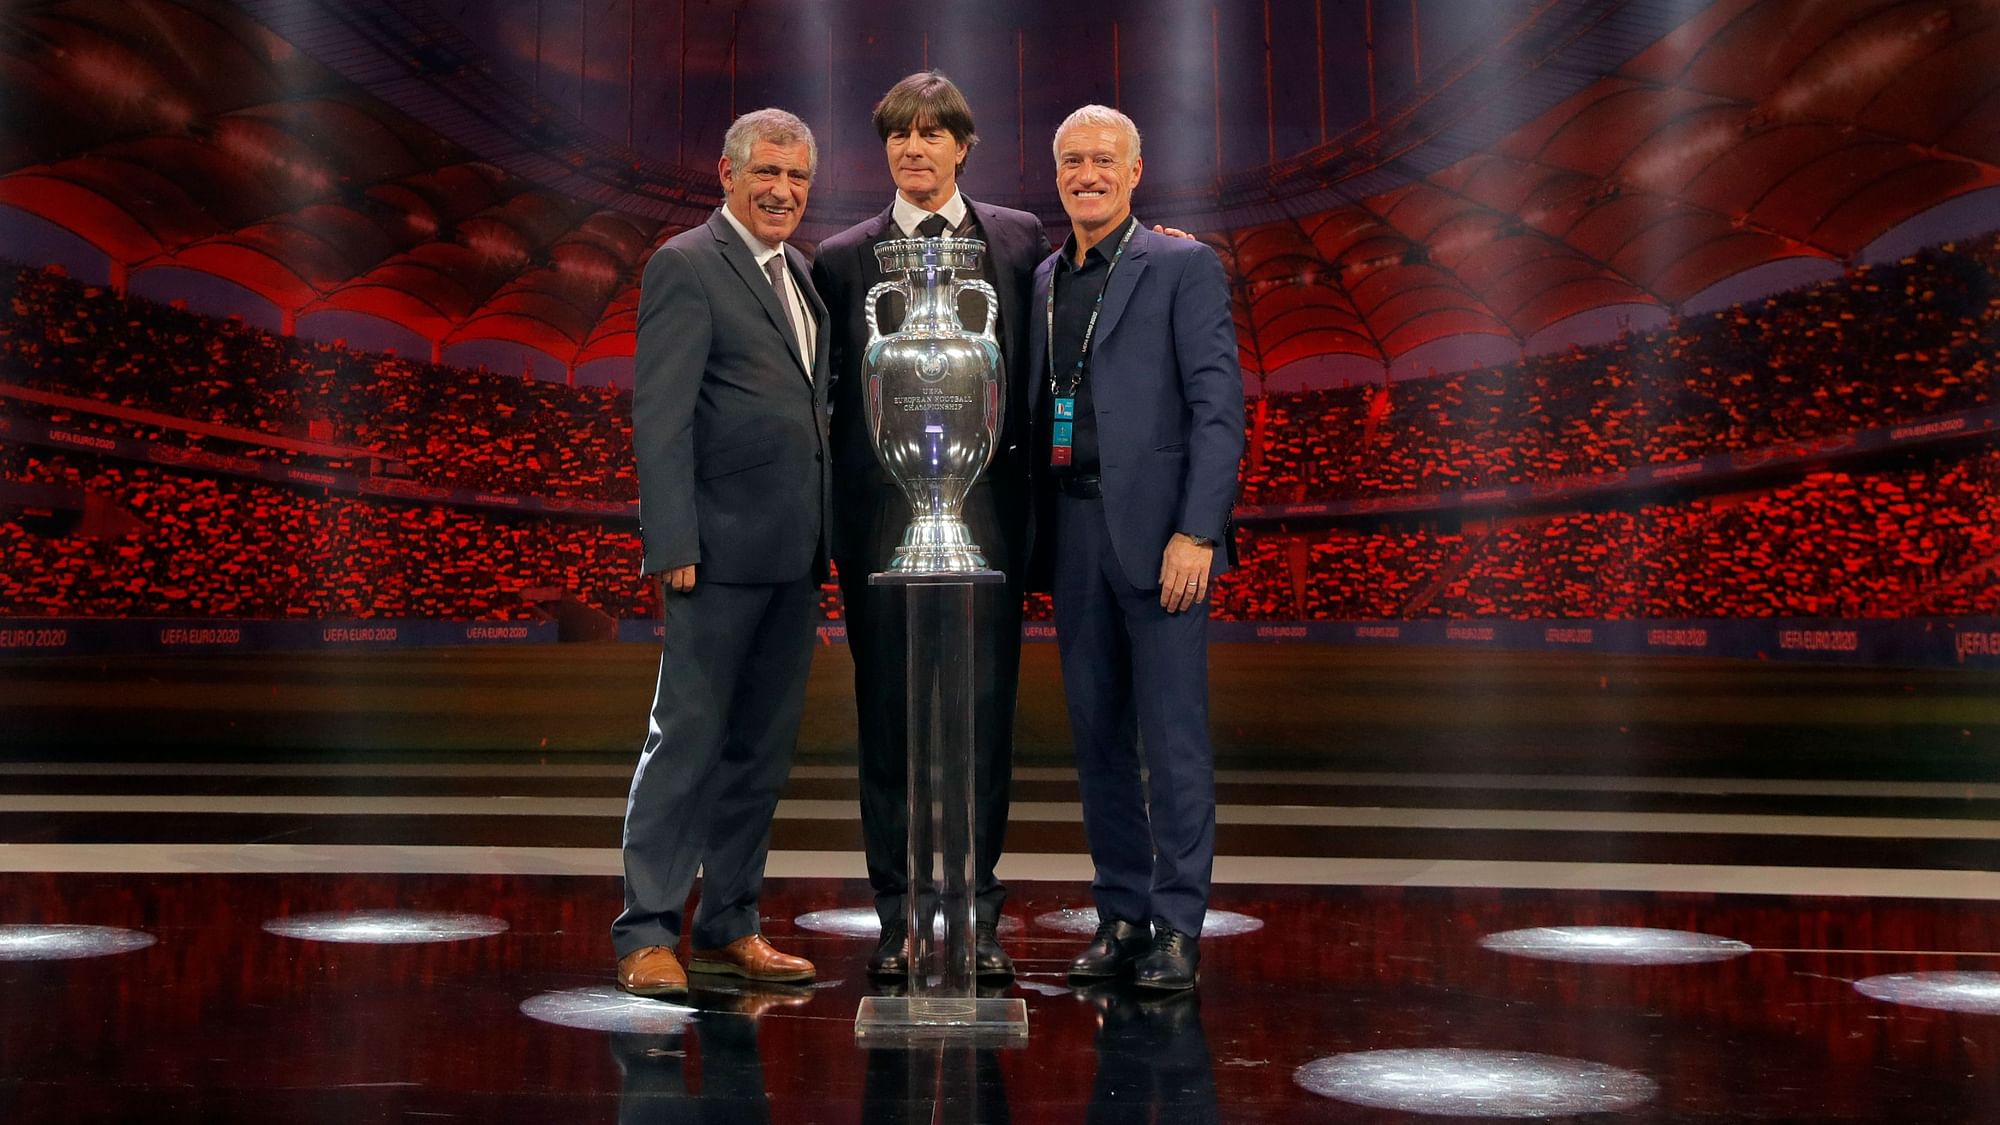 The coaches of Portugal Fernando Santos, left, Germany Joachim Loew and France Didier Deschamps who will play in group F, pose with the trophy after the draw for the UEFA Euro 2020 soccer tournament finals in Bucharest on Saturday, 30 November.